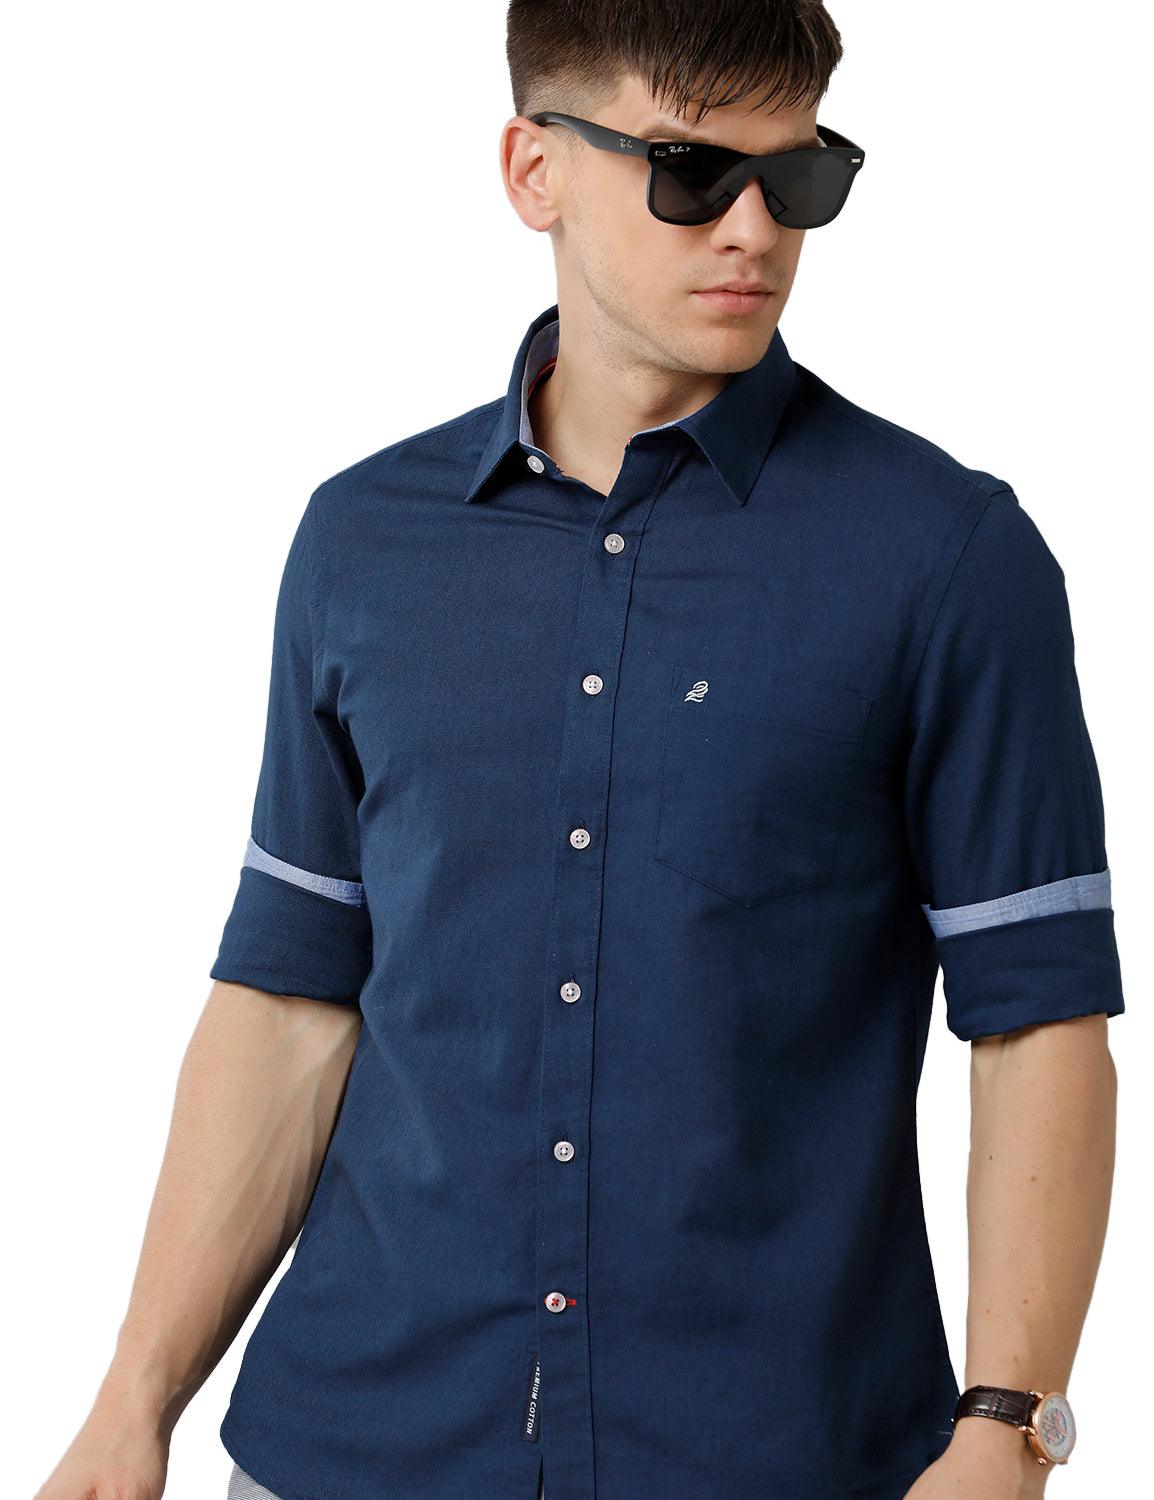 Navy Blue Solid Casual Shirt - Double Two